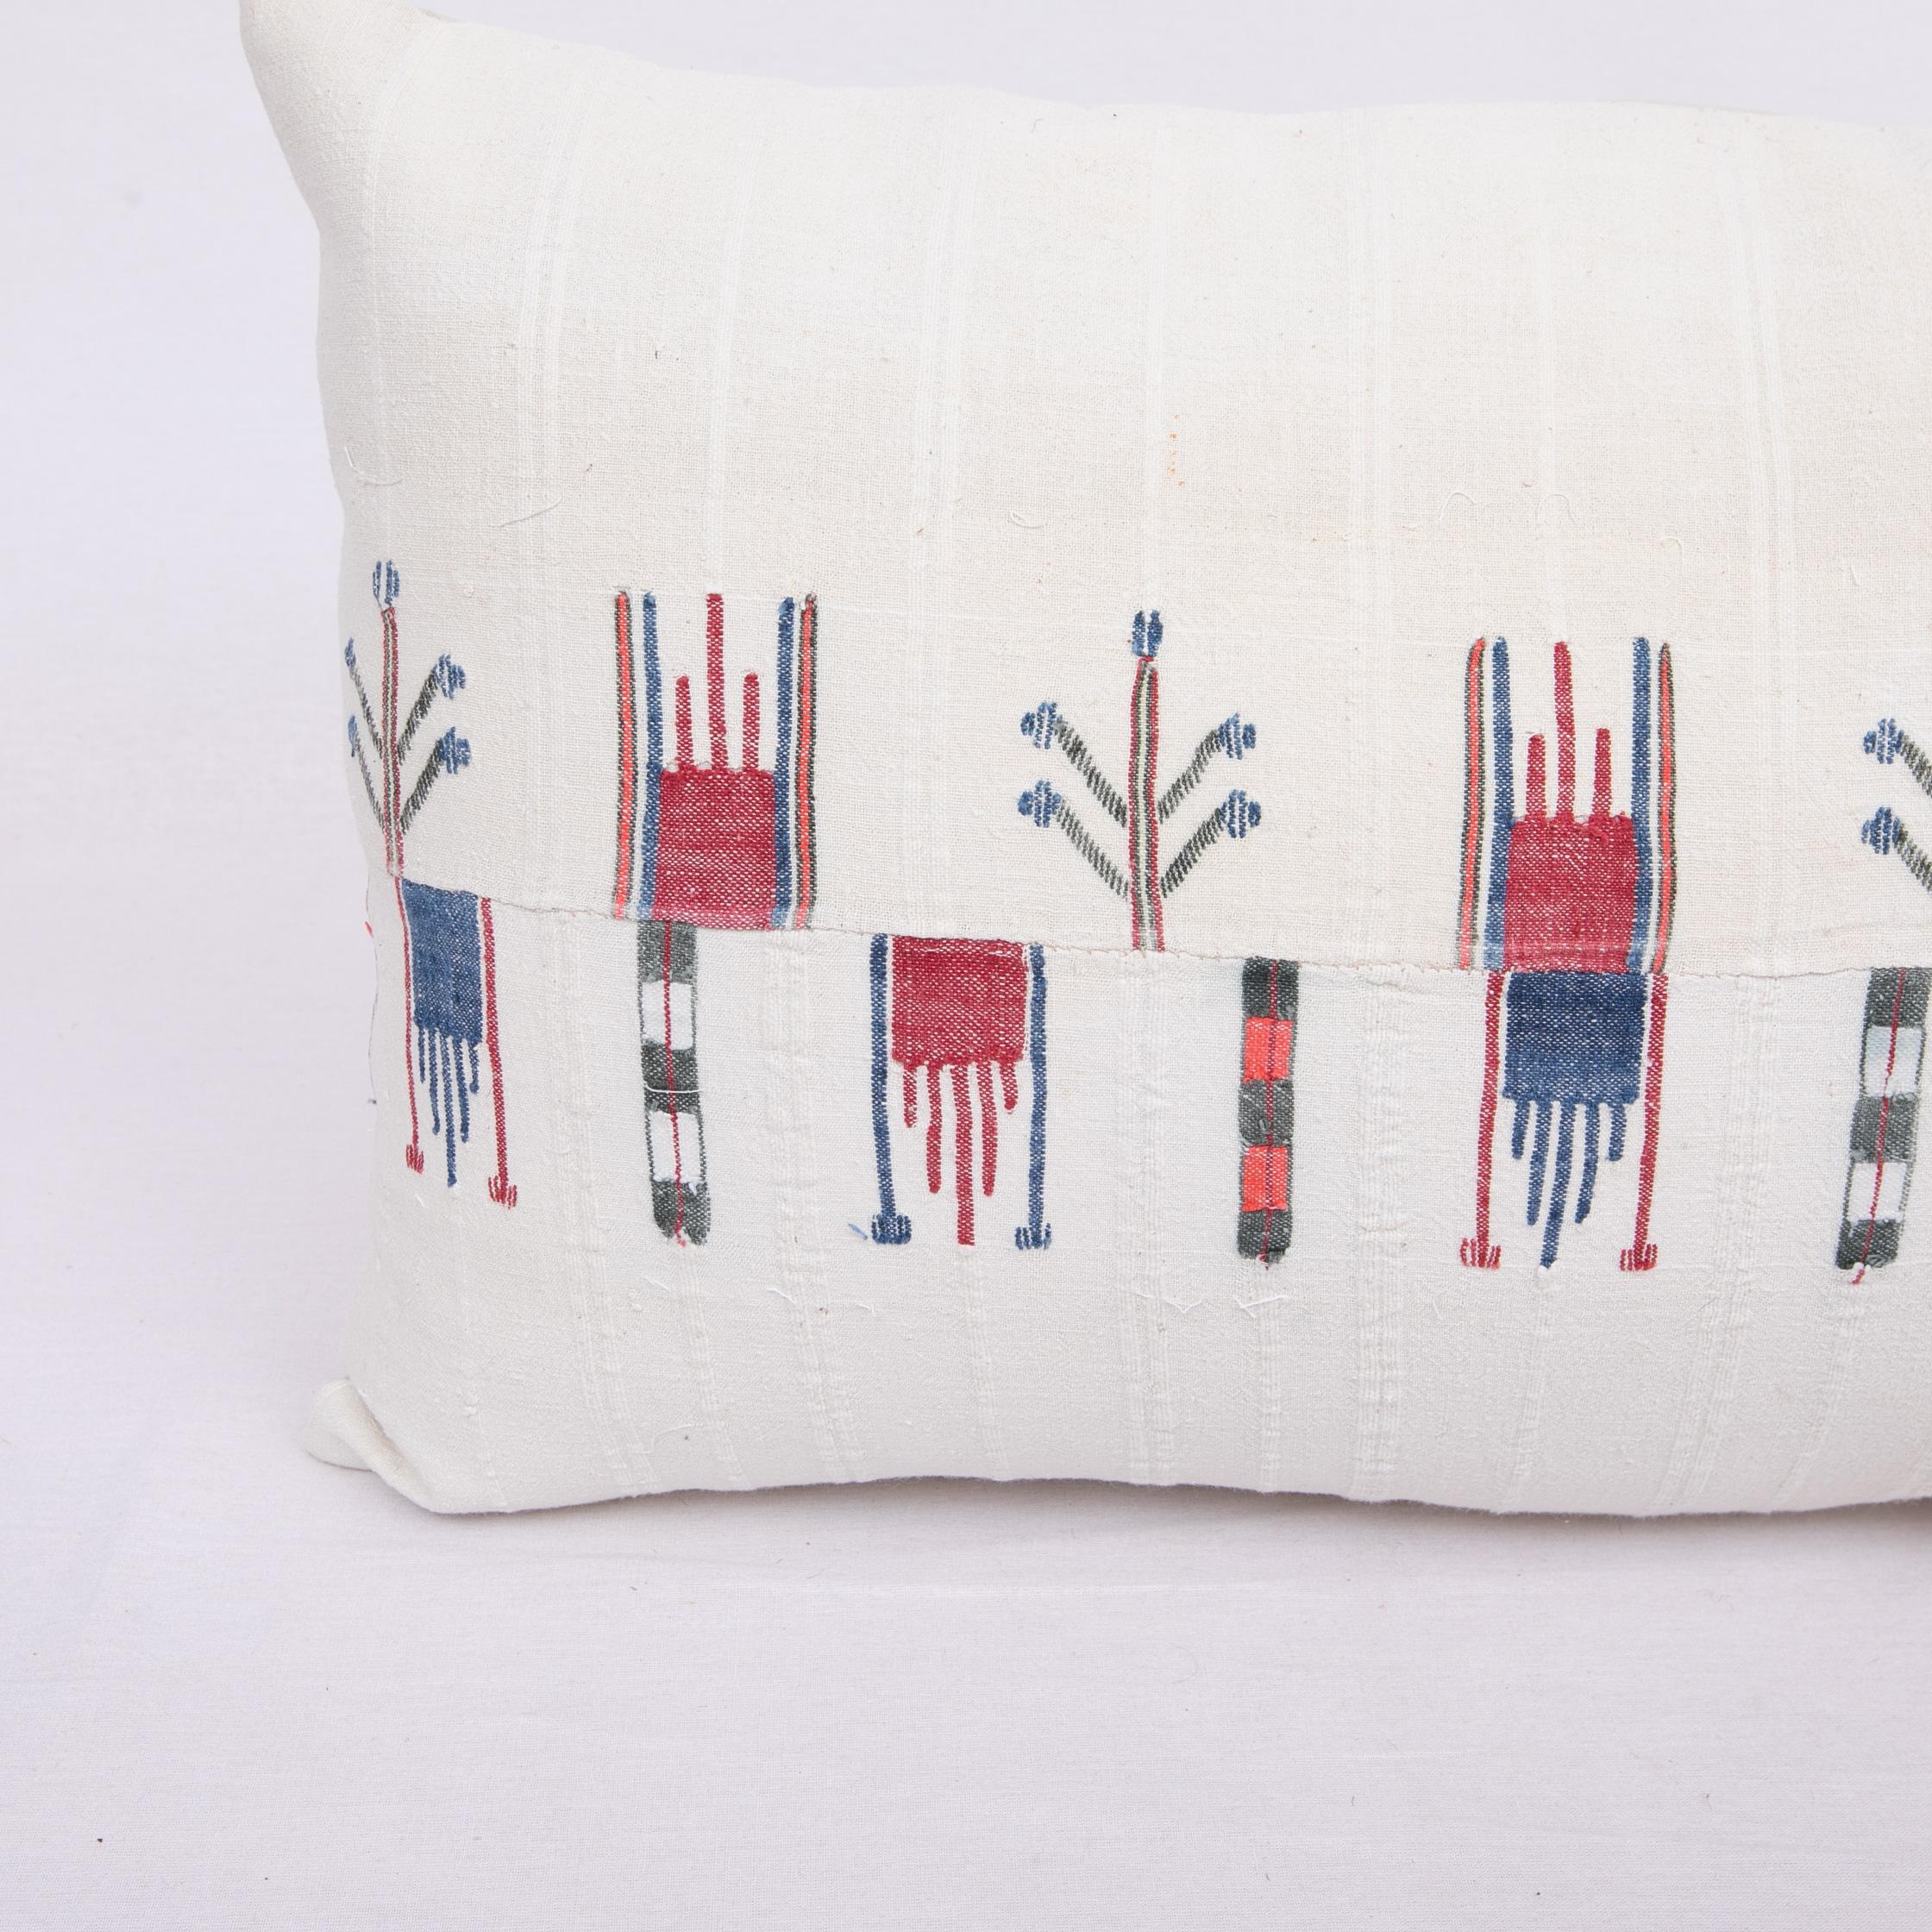 Rustic Pillow Case Fashioned from a Vintage Bulgarian Textile, 1960s